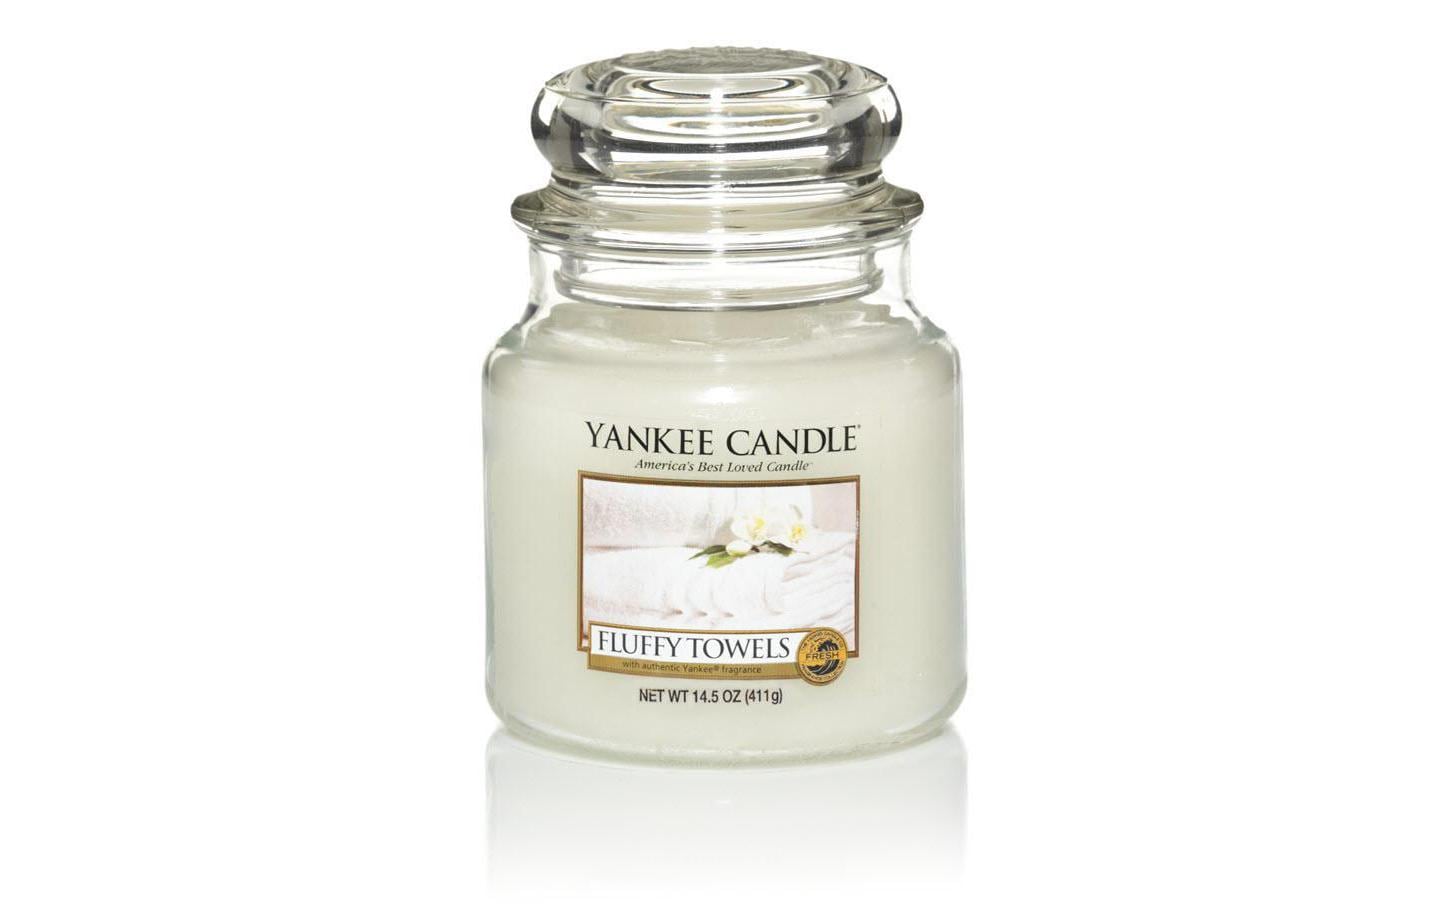 Yankee Candle Duftkerze »Fluffy Towels small Jar« von Yankee Candle